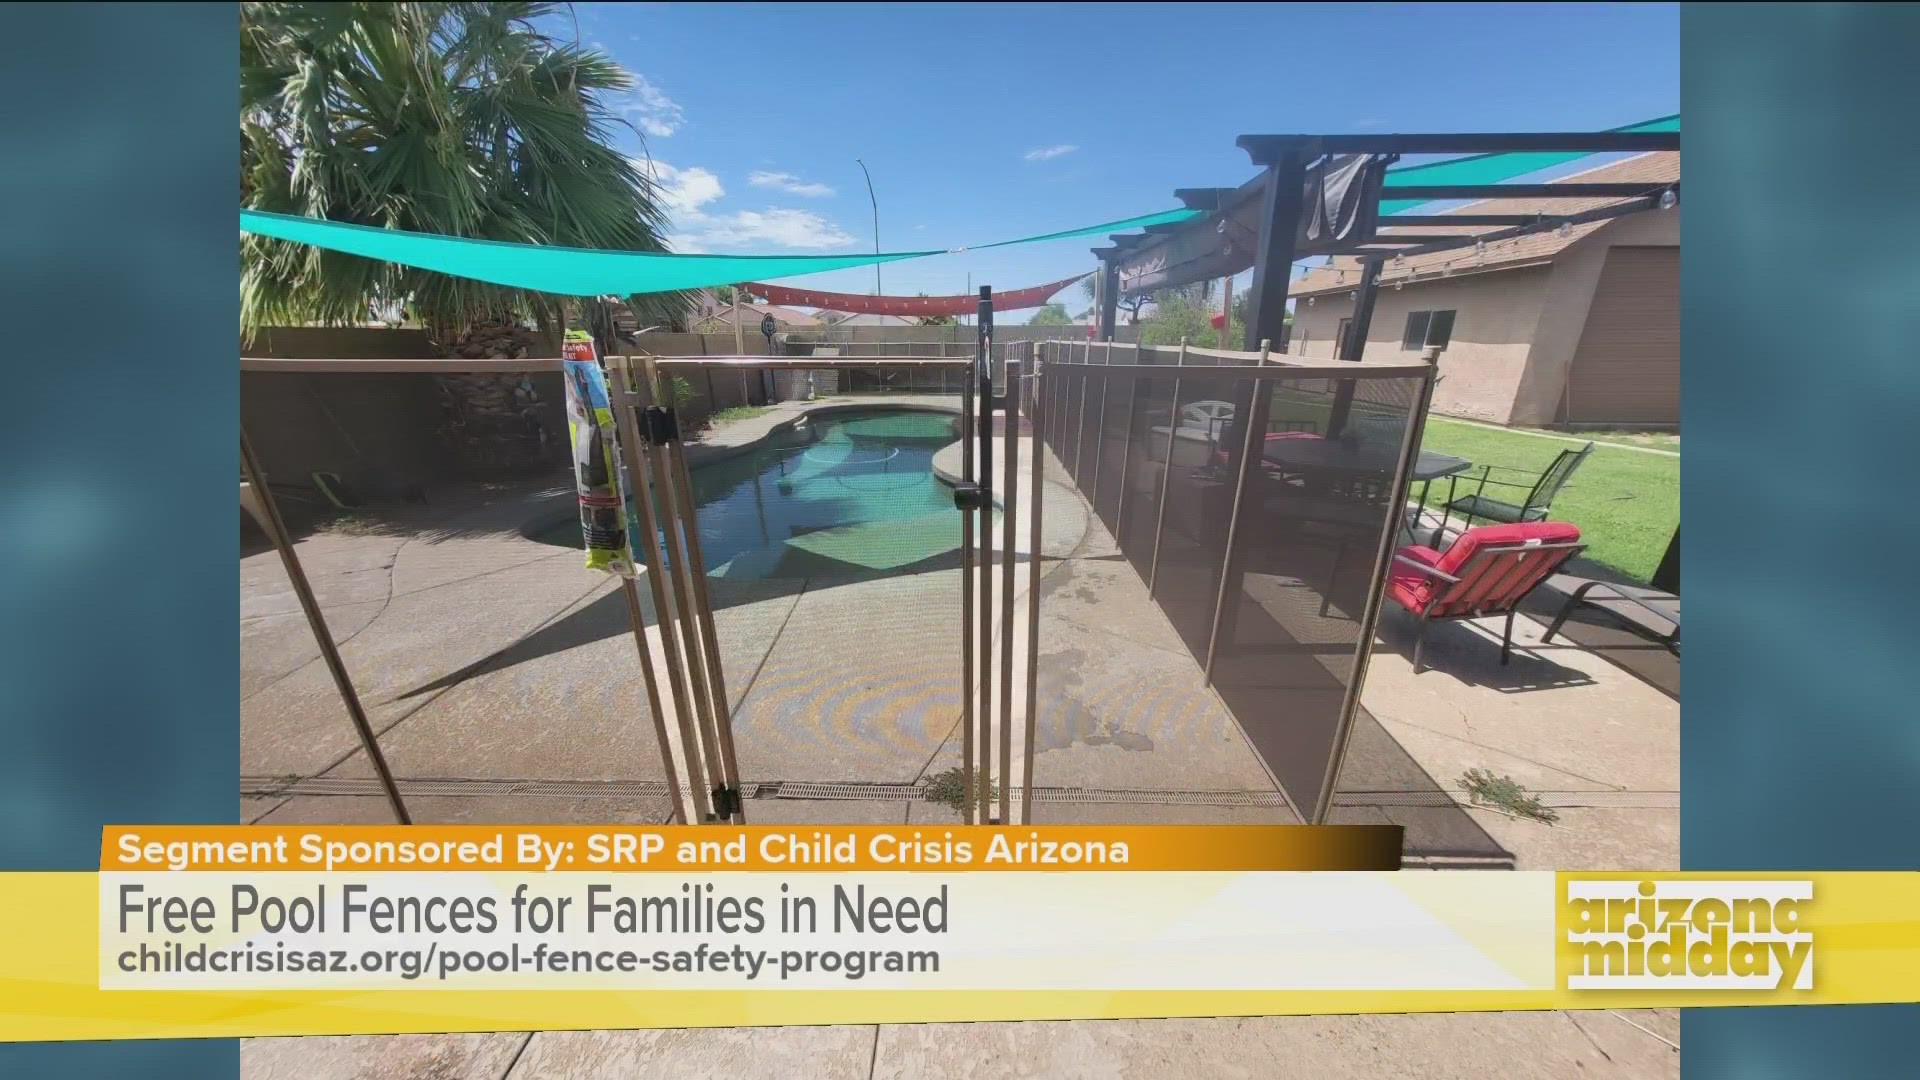 SRP, Child Crisis Arizona and United Phoenix Firefighters Charities team up to provide free pool fences for families in need with the Pool Fence Safety Program.